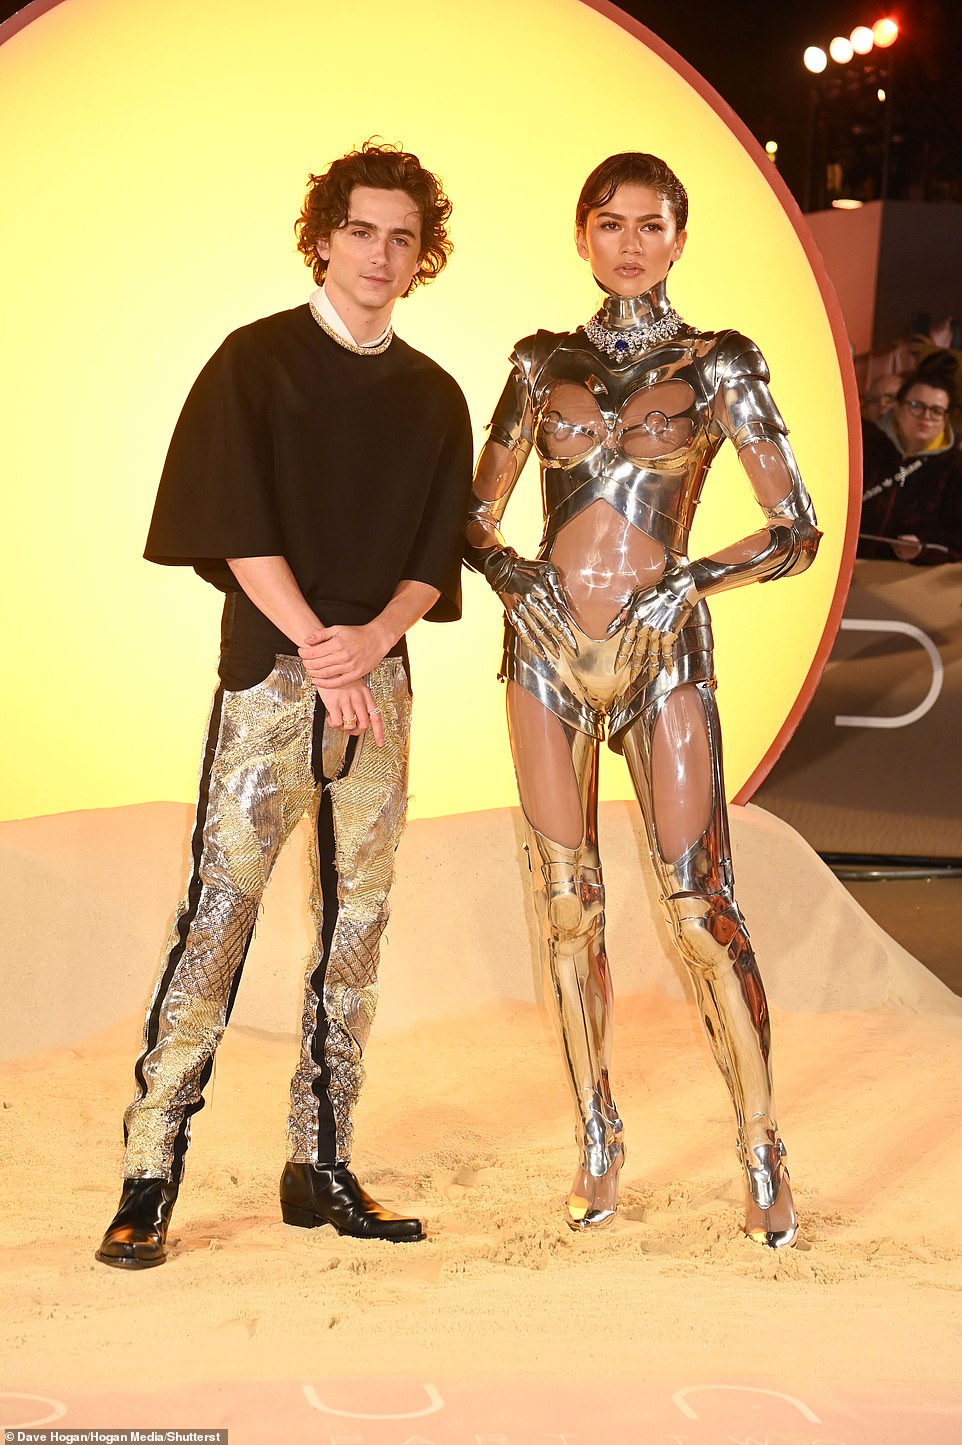 Zendaya also rocked a pair of silver gloves along with matching knee-high boots while posing with her co-star Timothee Chalamet.